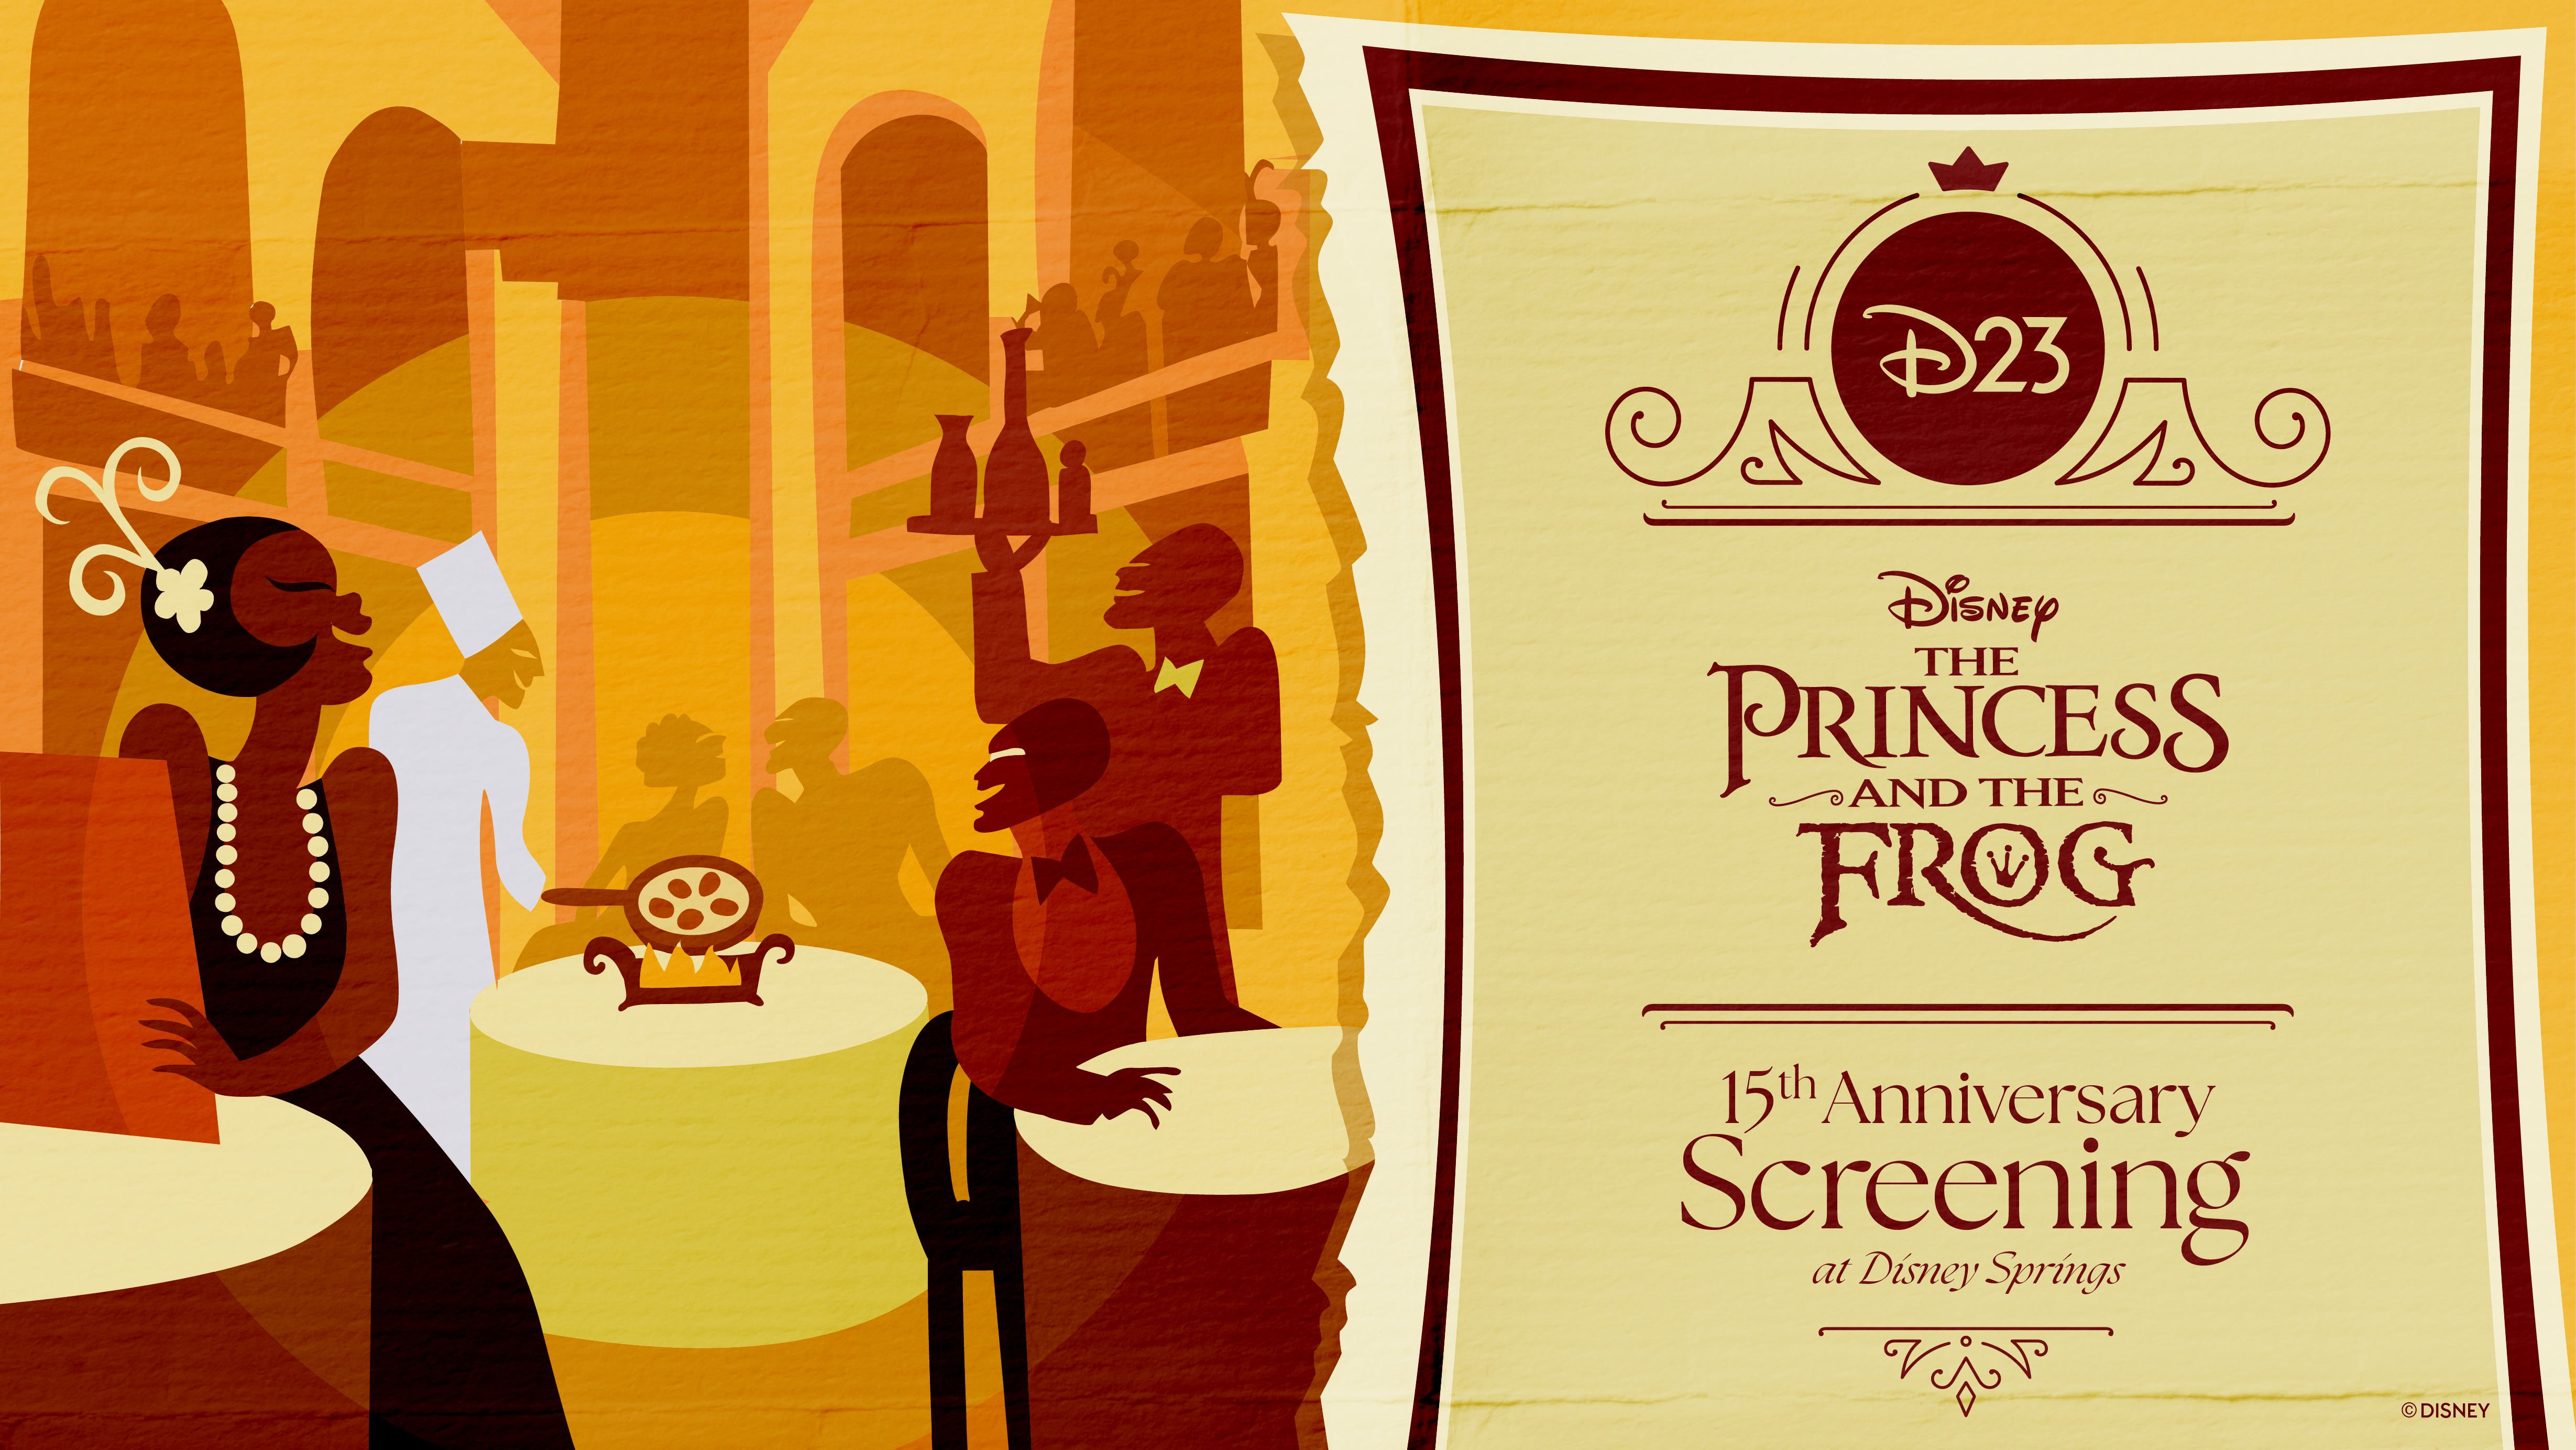 Graphic with an illustration of Tiana’s Palace in the orange and gold style of the “Almost There” sequence in the film: Patrons and restaurant employees are enjoying dinner, all with big smiles: A chef cooking eggs, a waiter holding bottles of wine on a tray, and two guests sitting at tables, one with a menu. There is an invitation to the right side depicting the event name “D23. Disney. The Princess and the Frog - 15th Anniversary Screening at Disney Springs.”